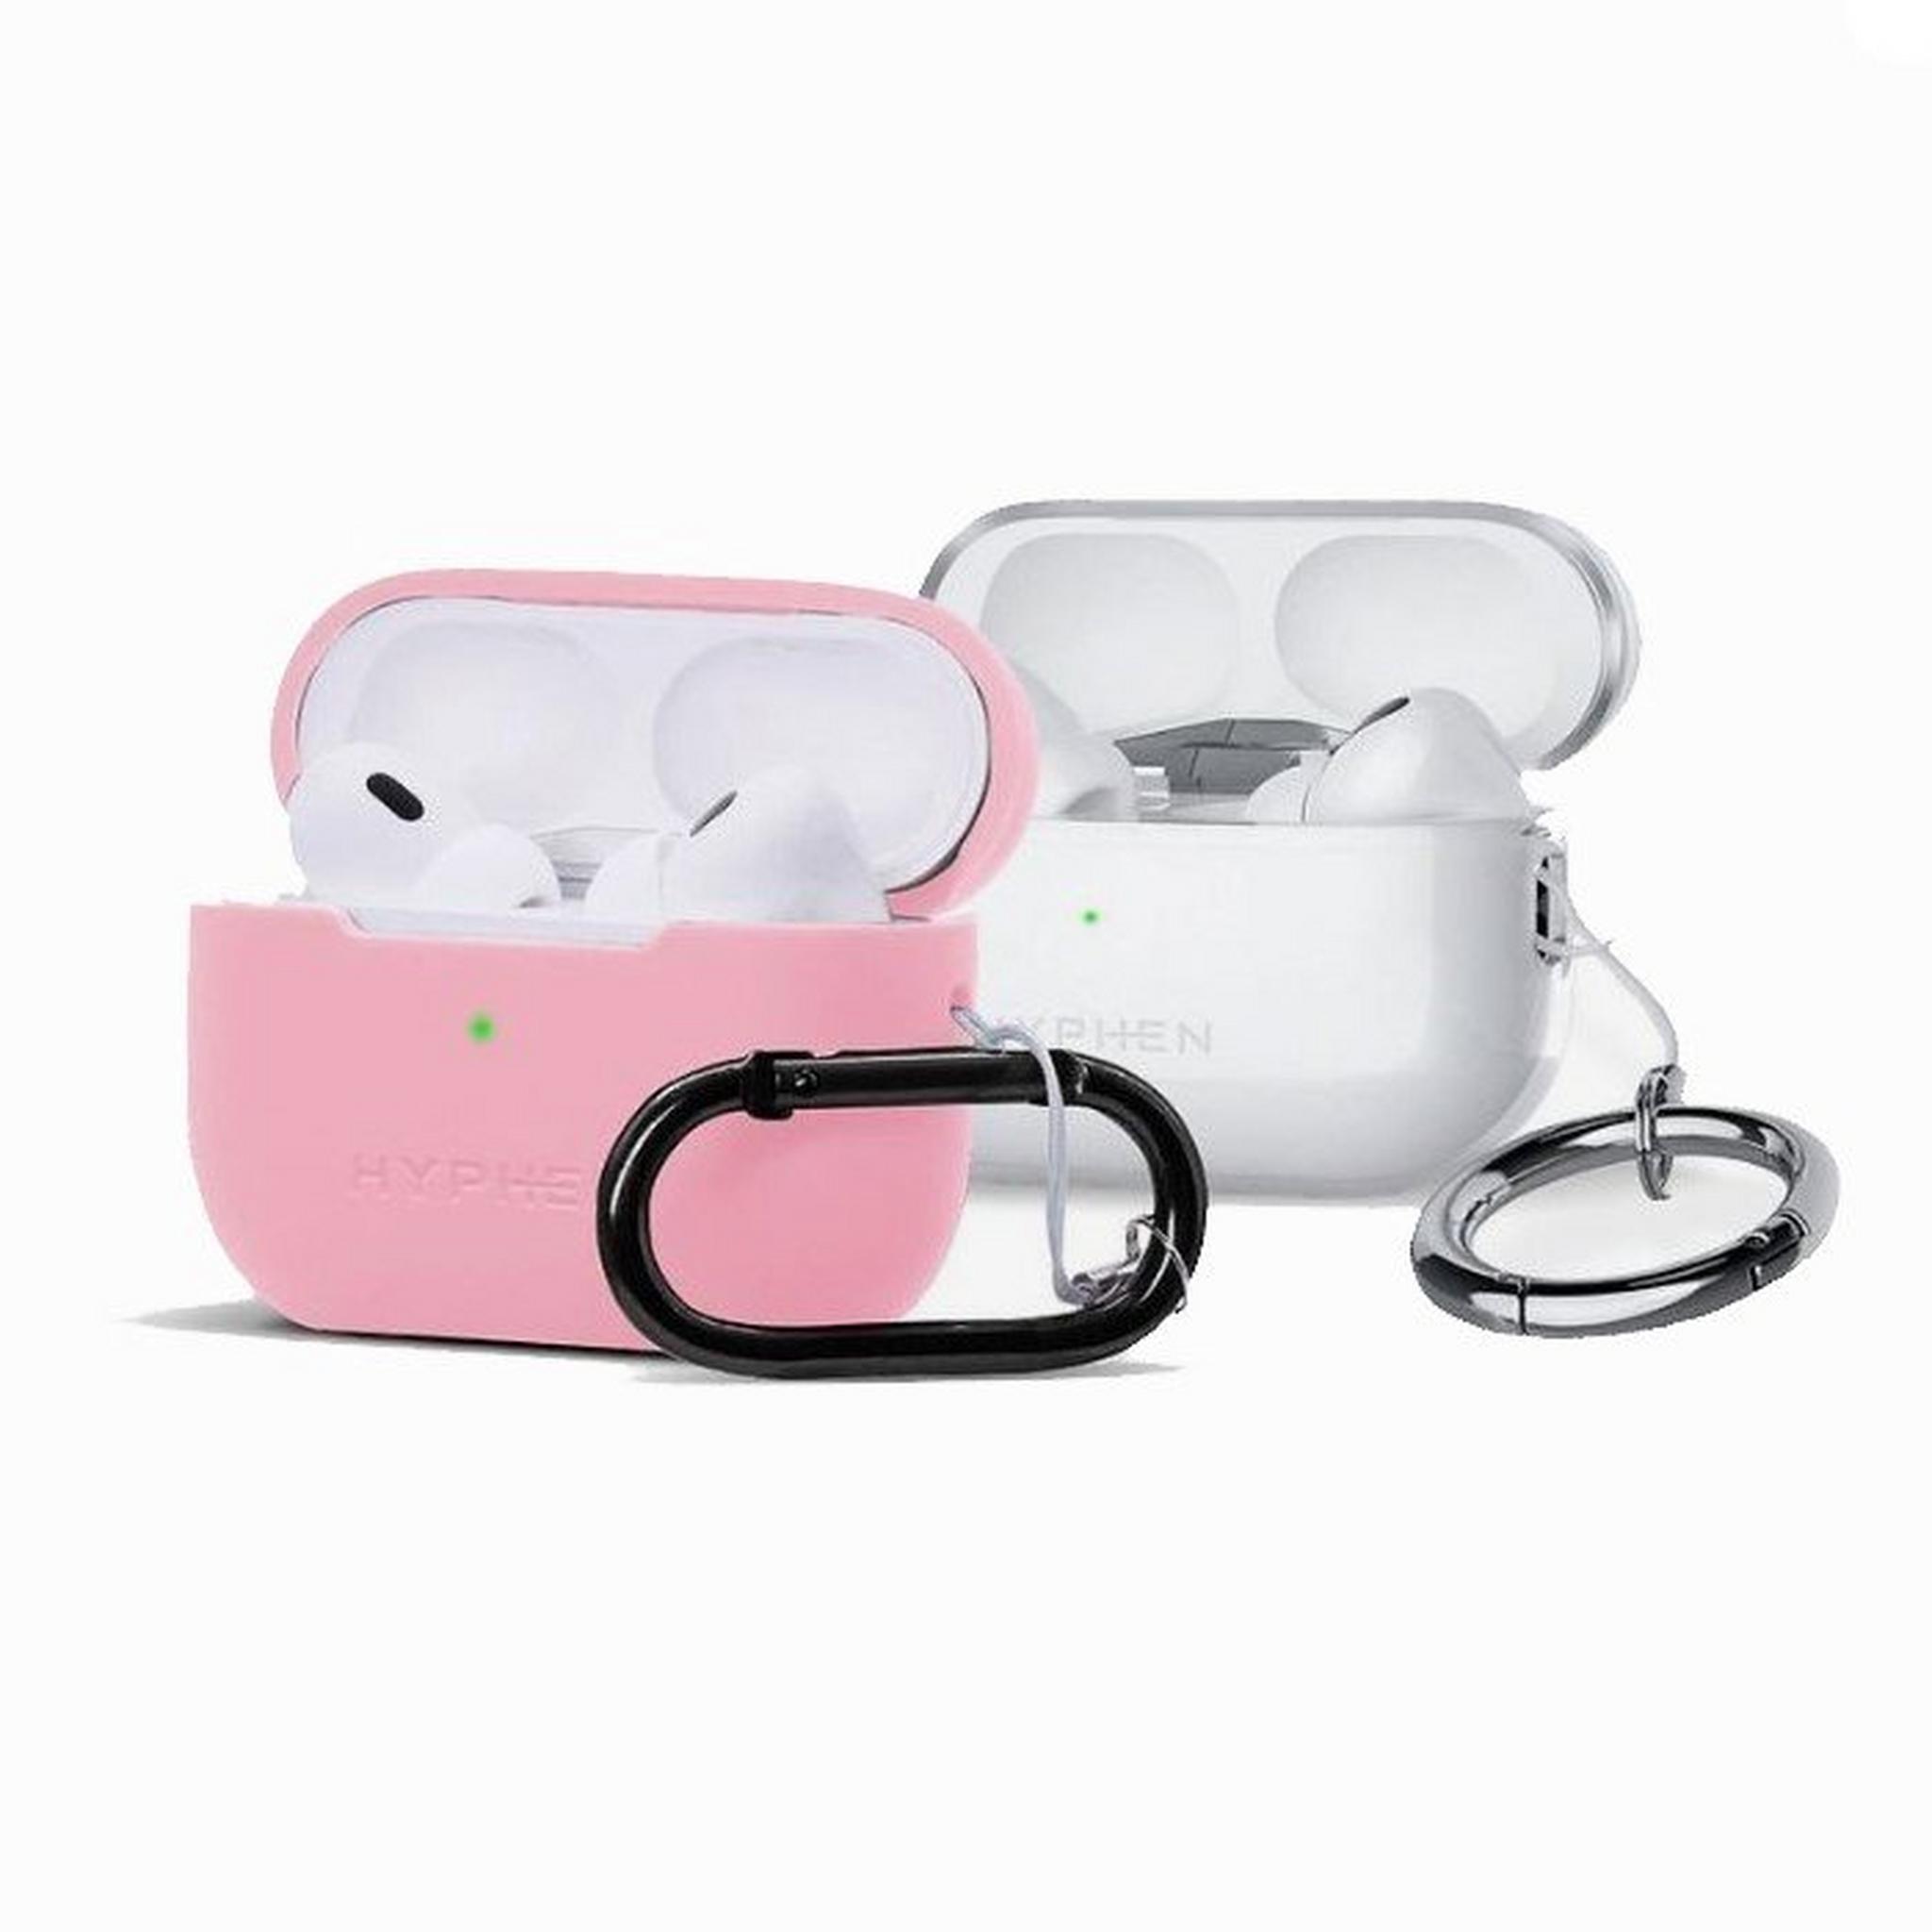 Hyphen Apple Airpods Pro 2nd Gen Silicone + Clear Case, HAC-SCP2PK6913 - Pink